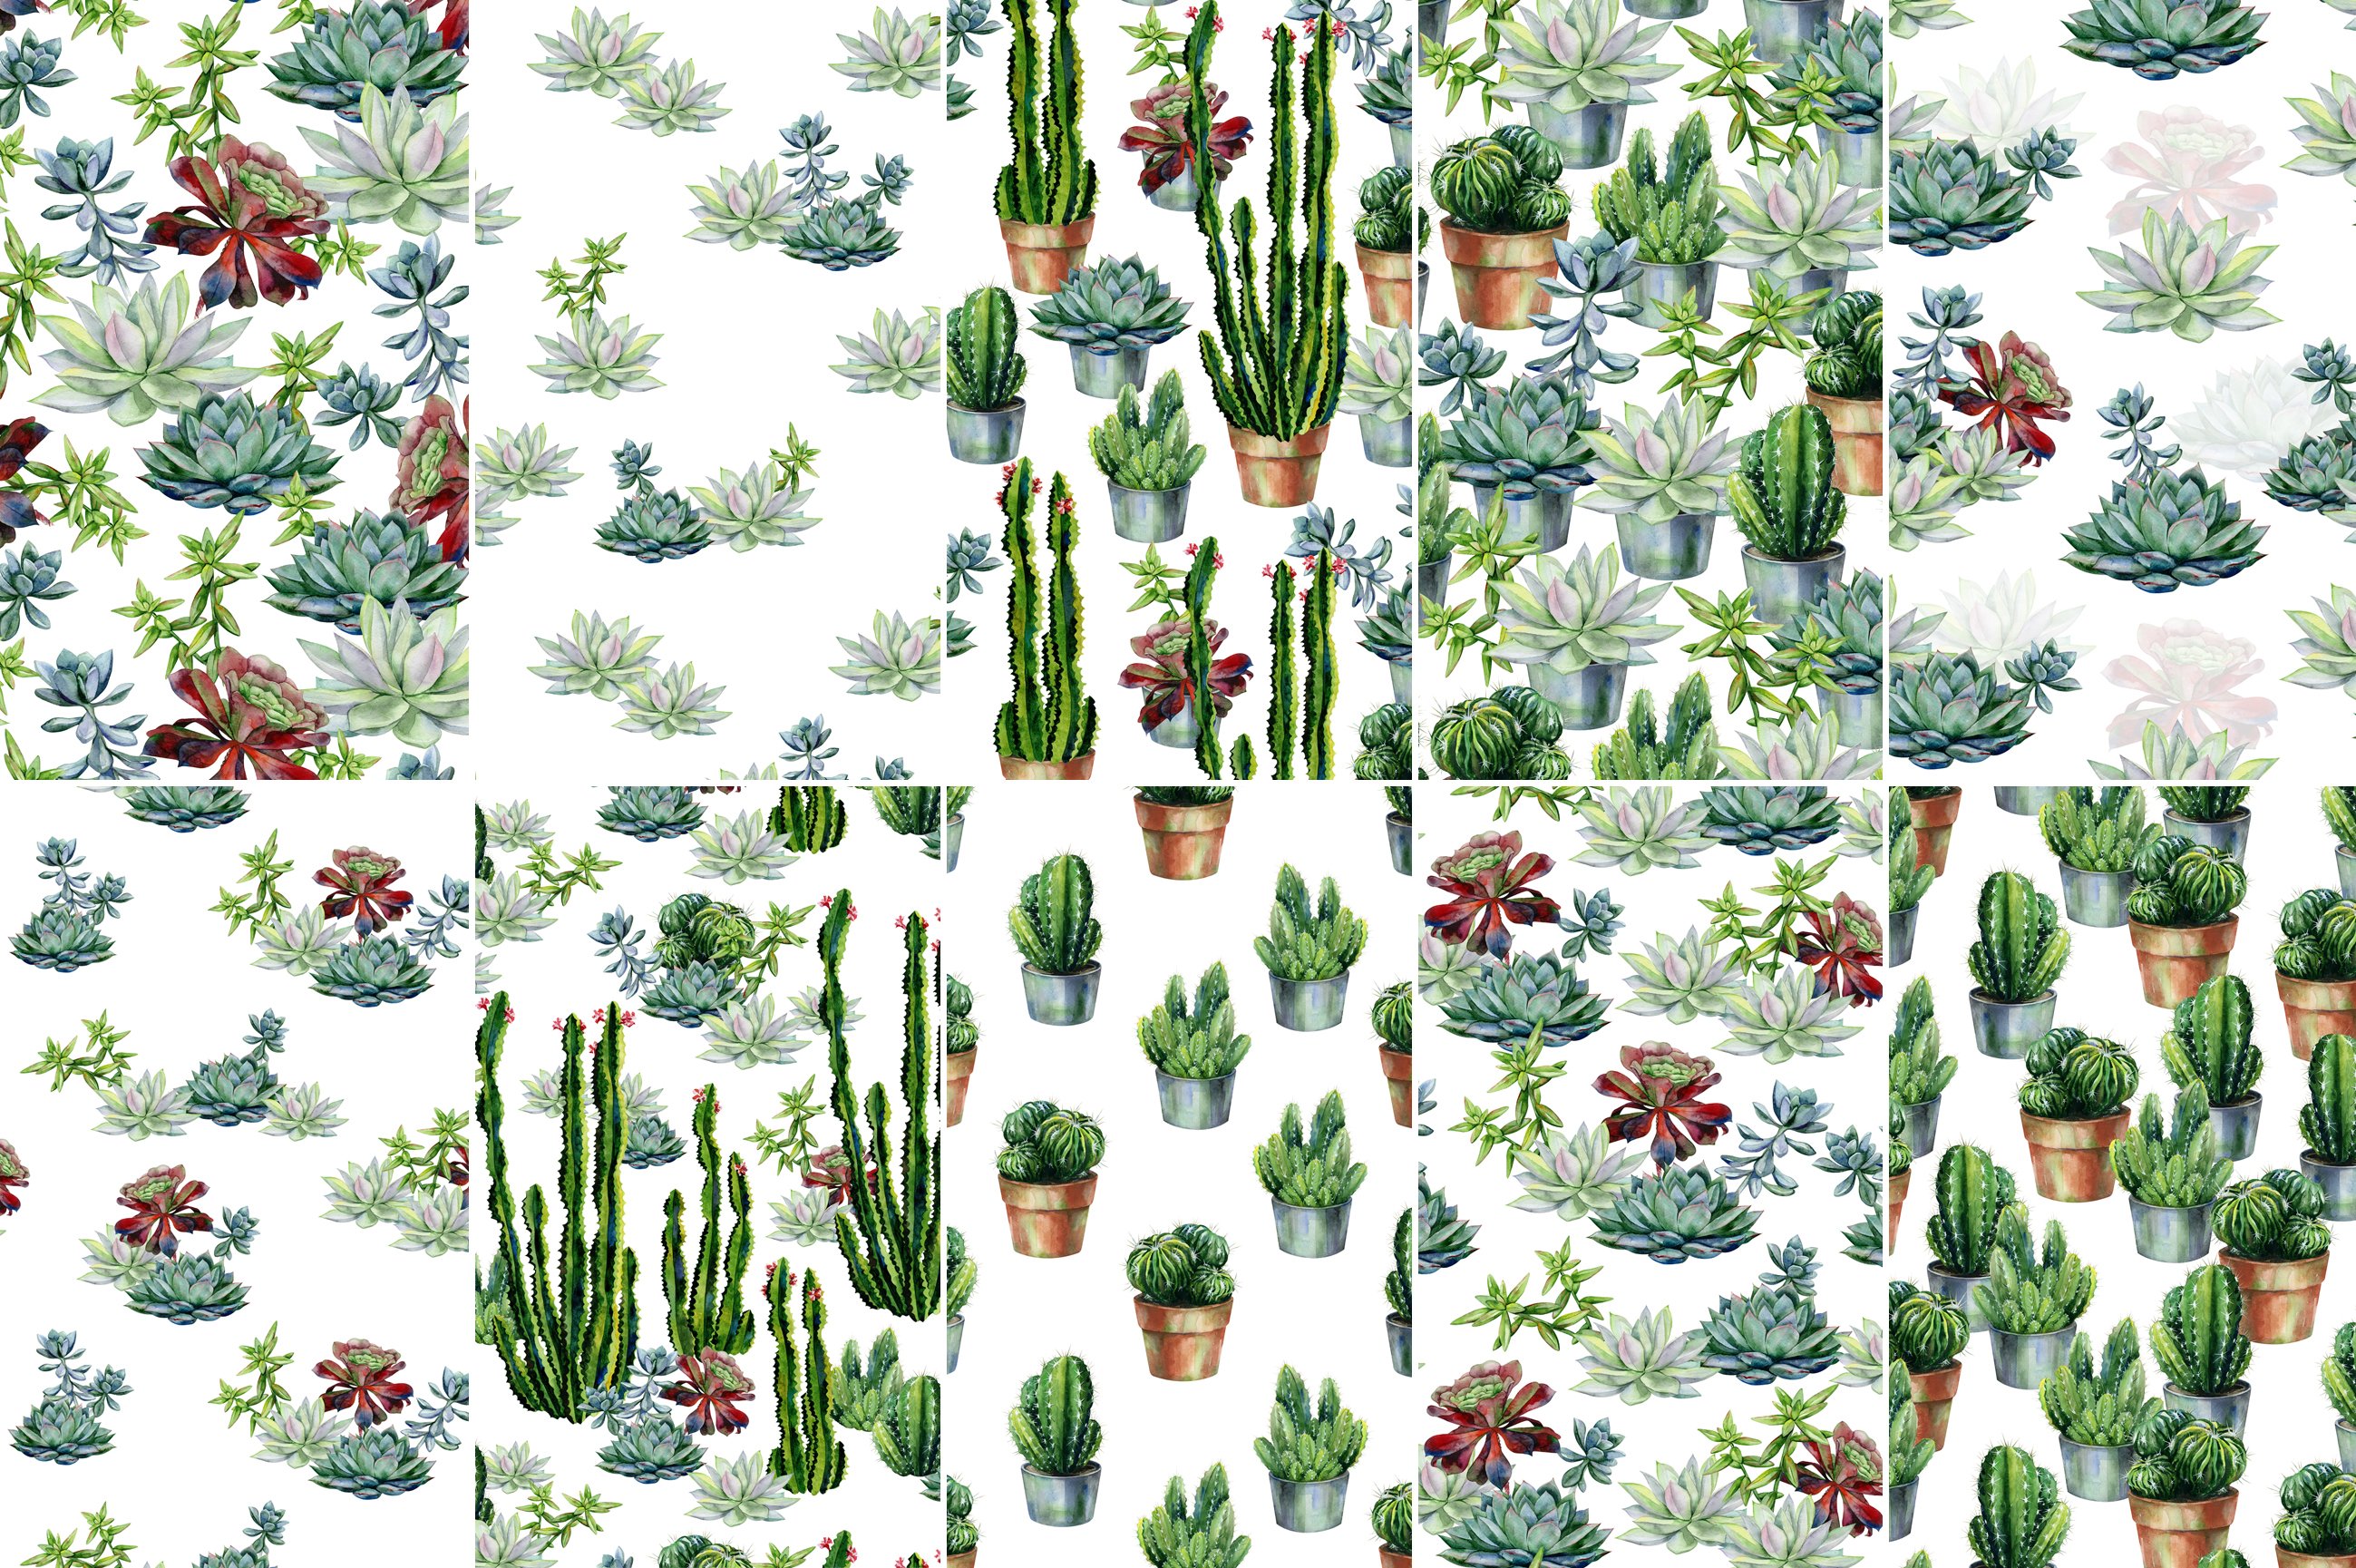 Bunch of cactus plants on a white background.